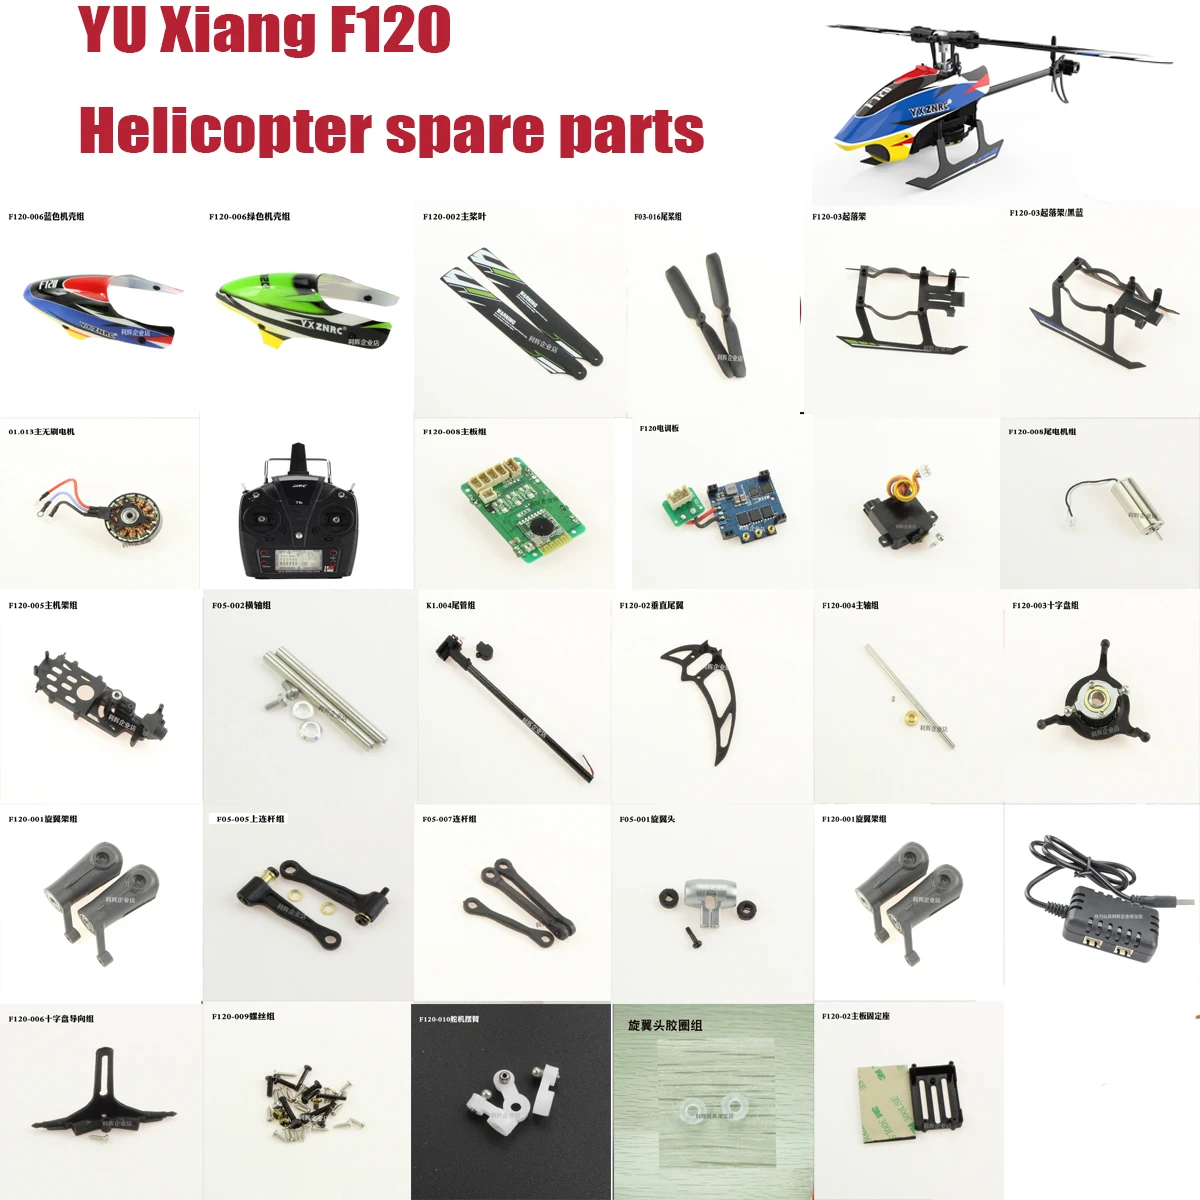 

YU Xiang YUXiang F120 / E120S RC Helicopter parts propellers motor ESC Motherboard servo charger LandingTail blade Hood shaft